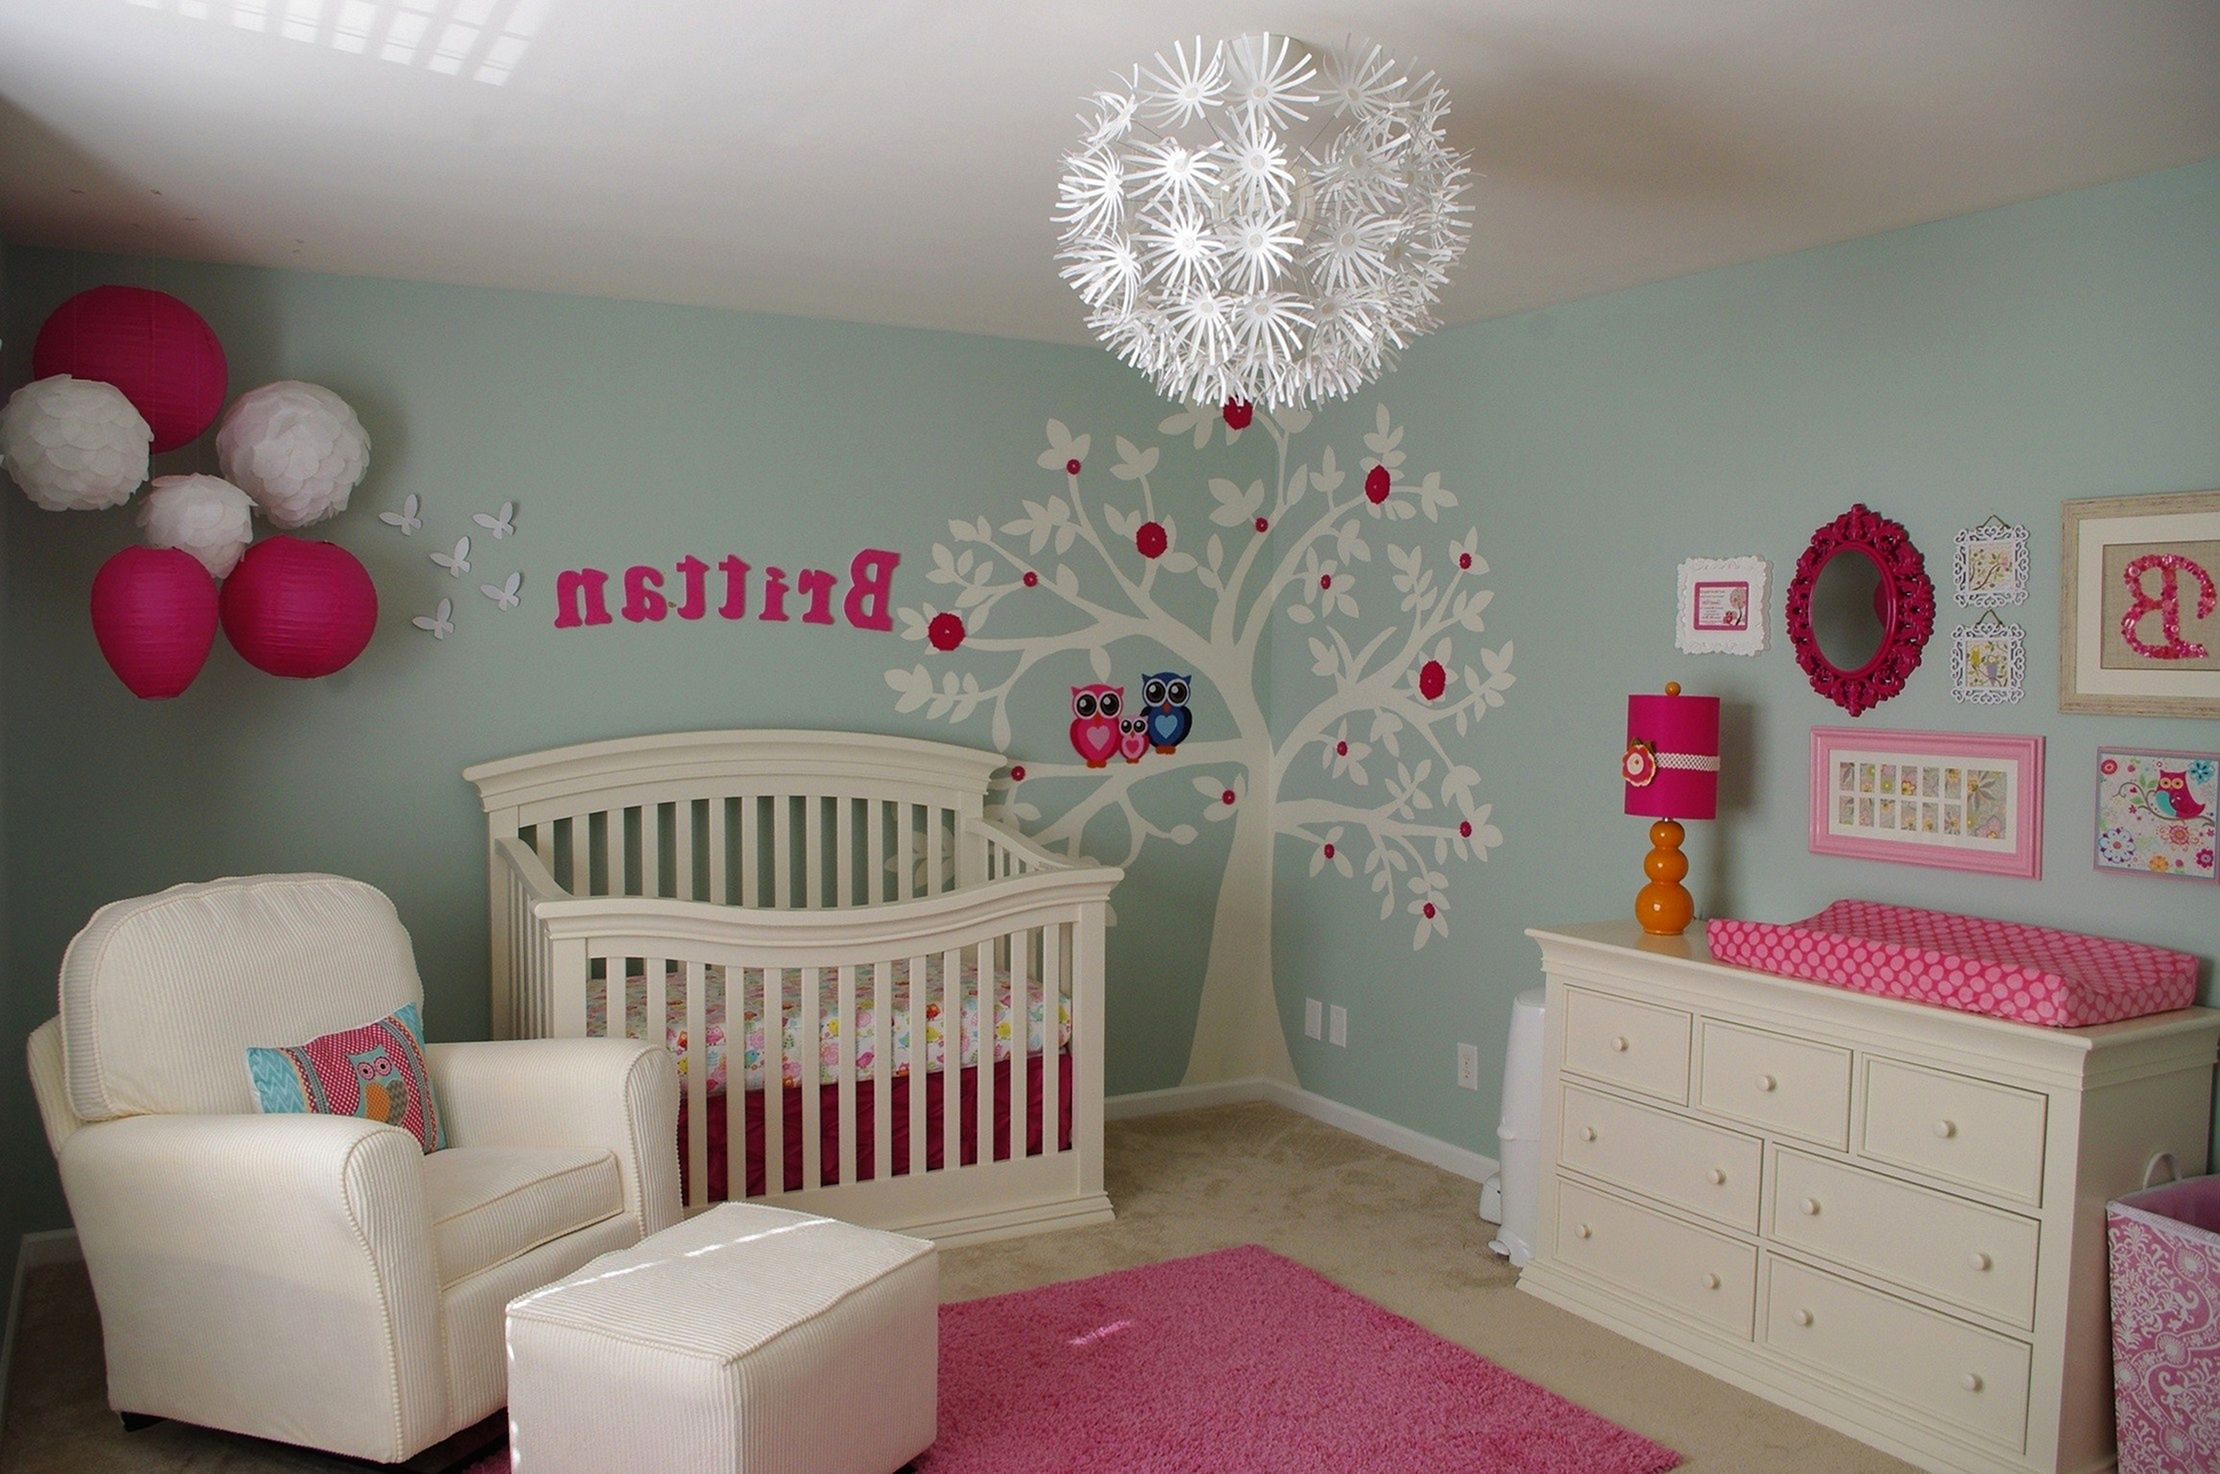 Room Decoration For Baby Girl
 DIY Baby Room Decor Ideas For Girls DIY Baby Room Decor